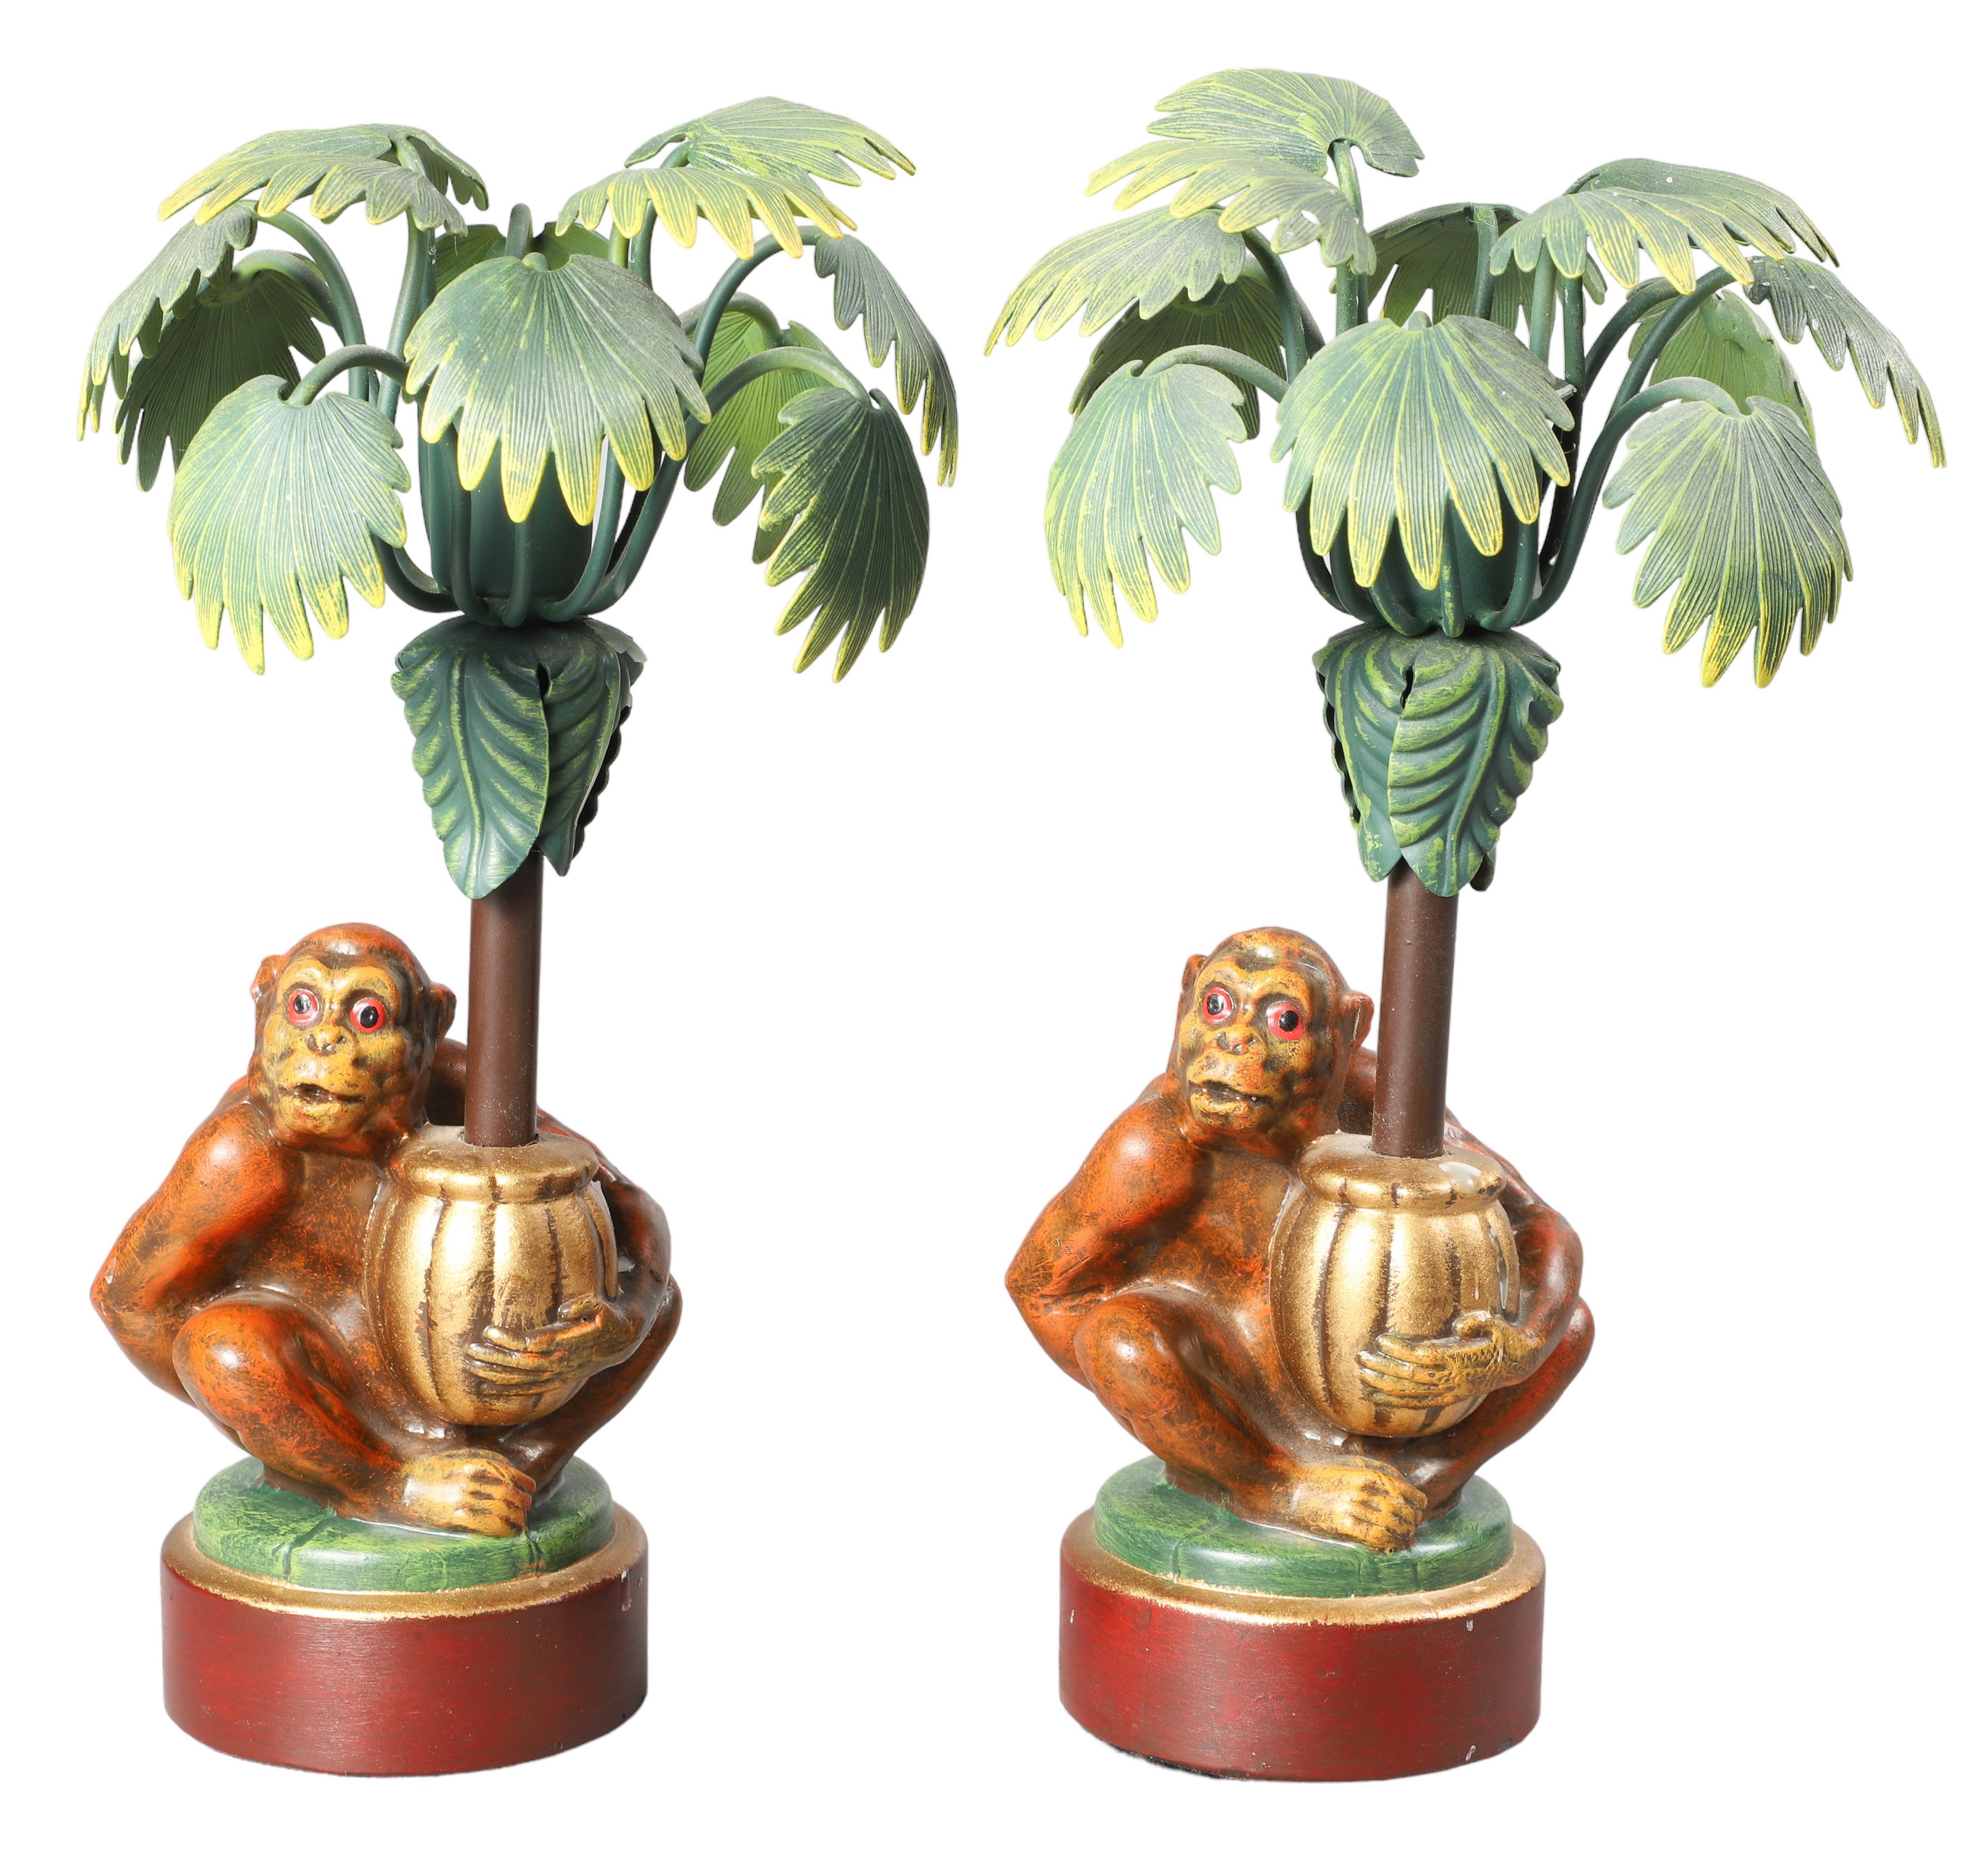 Pair of Petites Choses monkey and